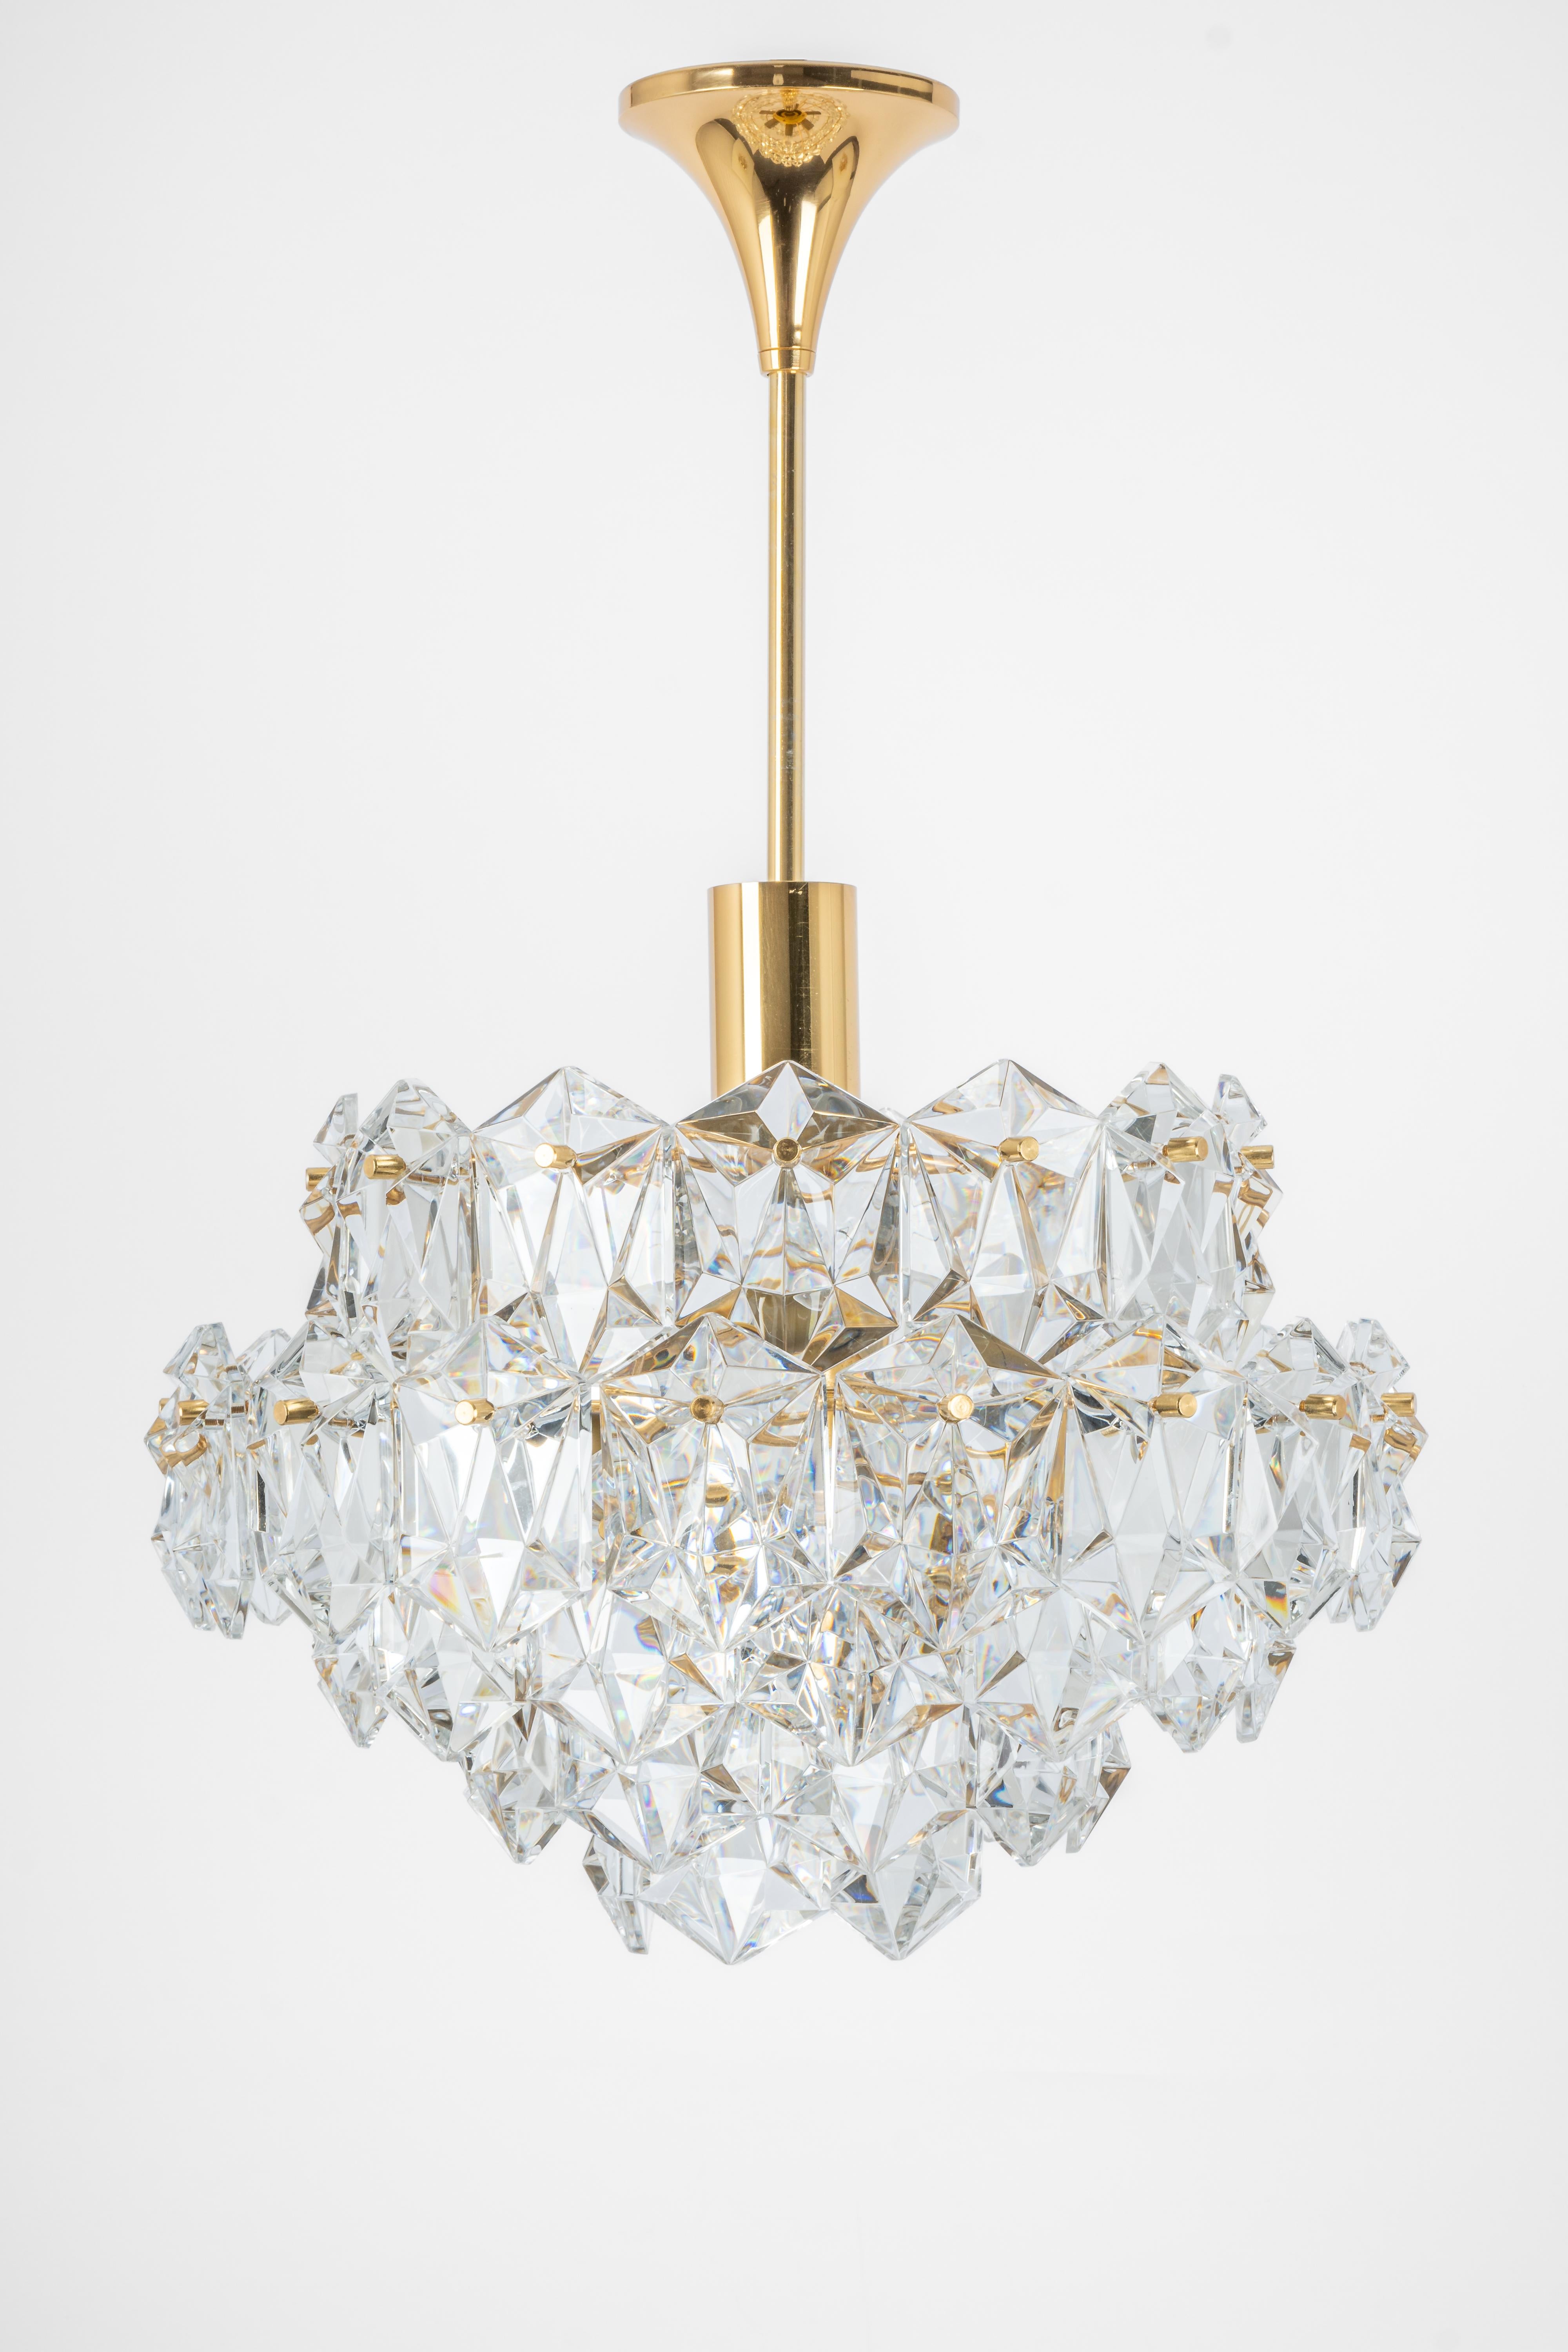 1 of 3 Stunning Chandelier, Brass and Crystal Glass by Kinkeldey, Germany, 1970s For Sale 4